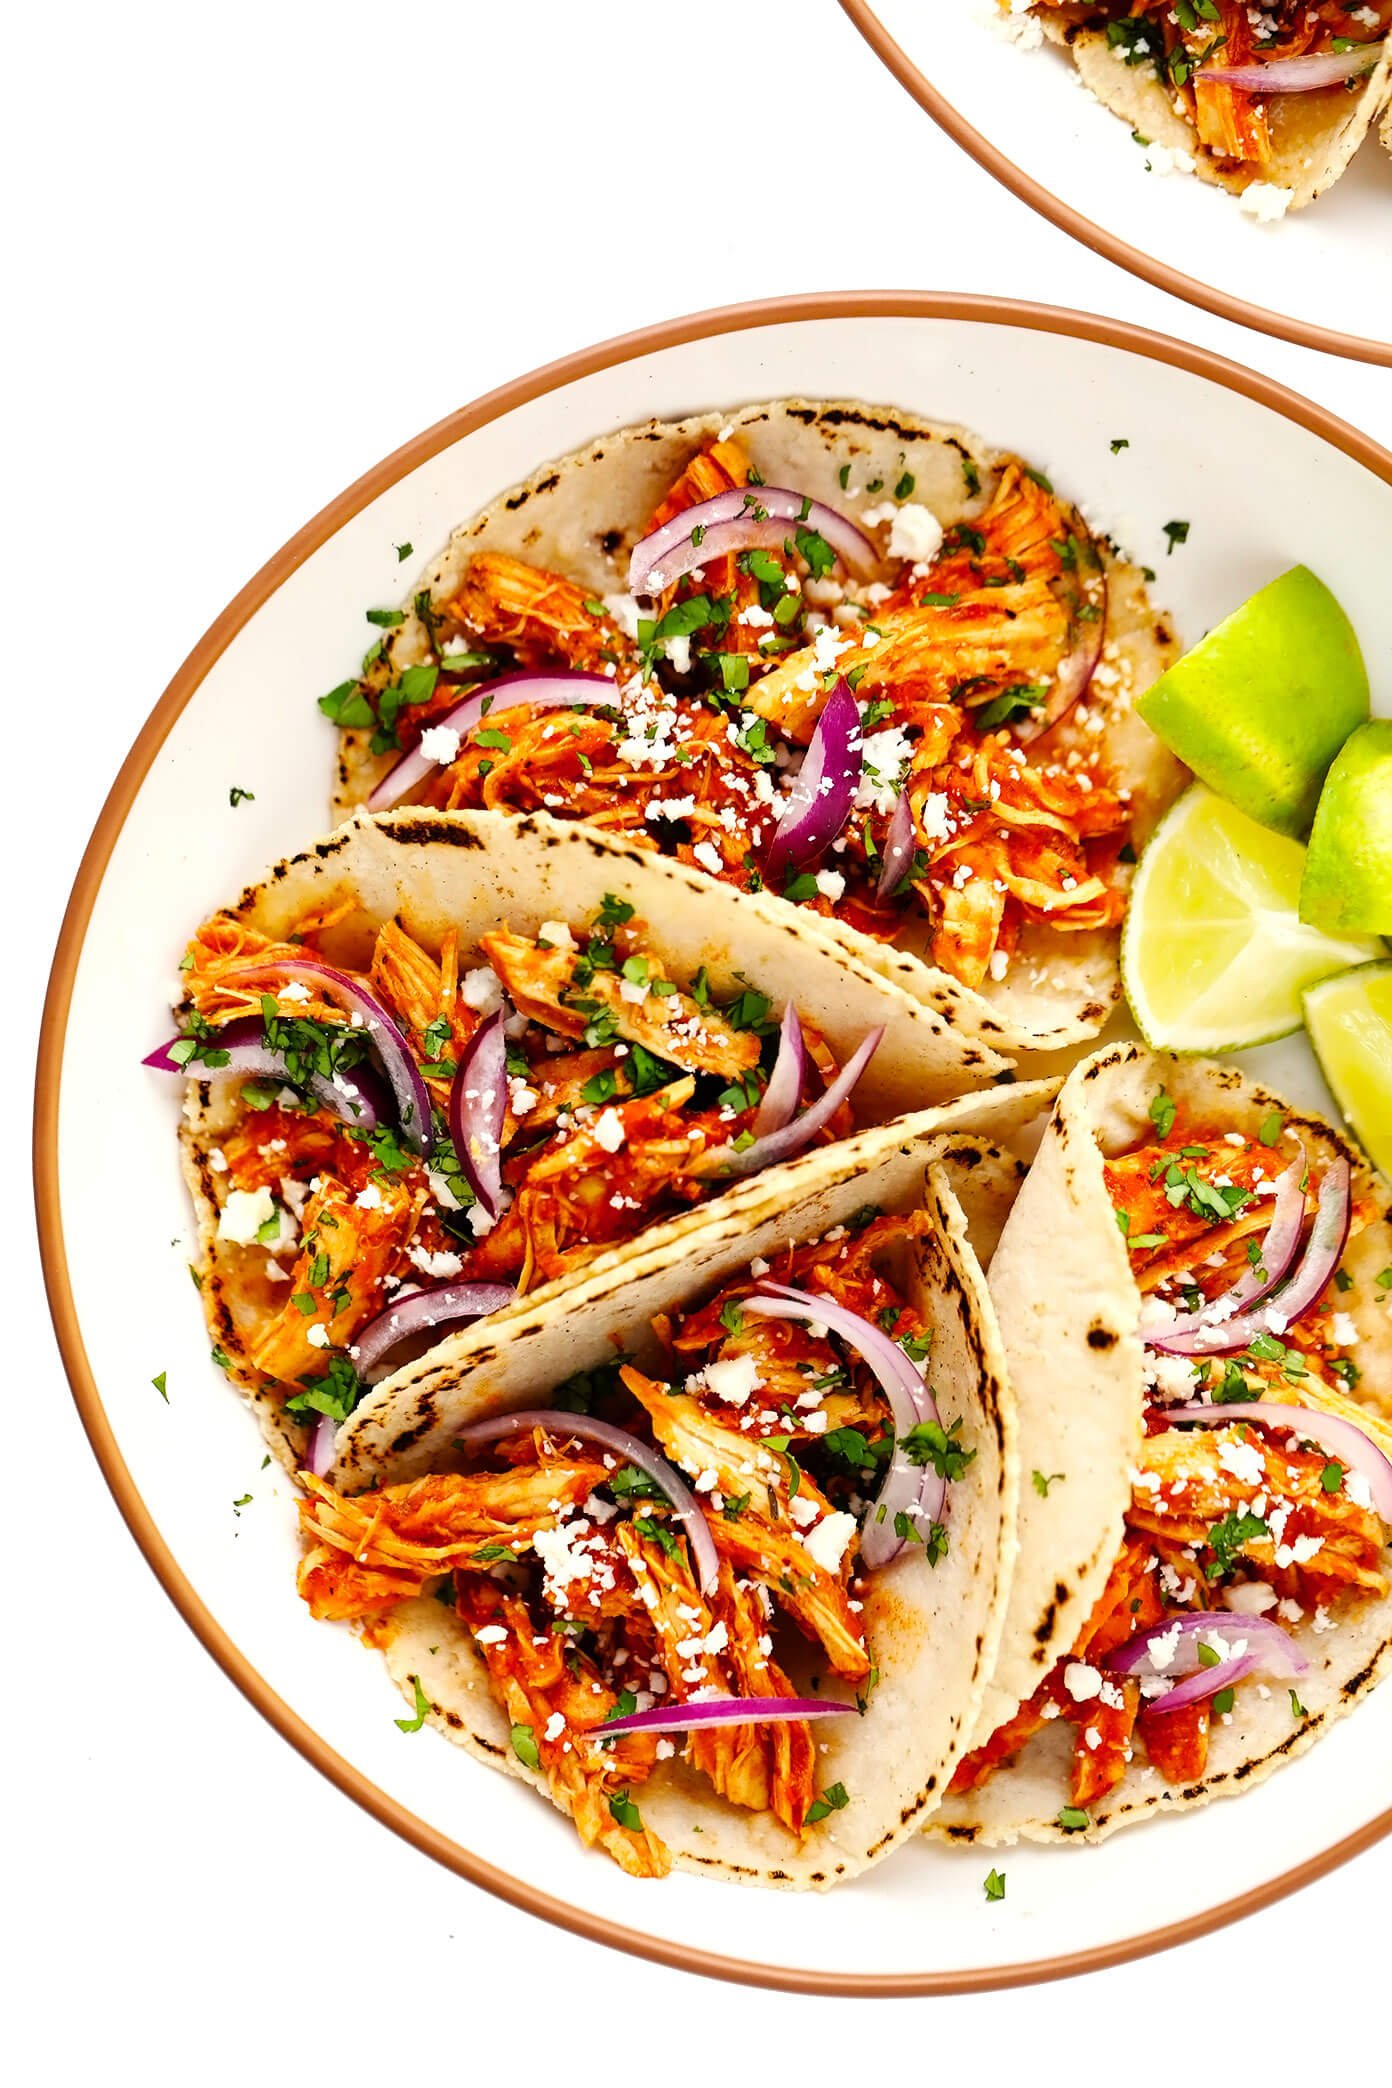 Chicken Tinga Tacos in Bowls with Limes